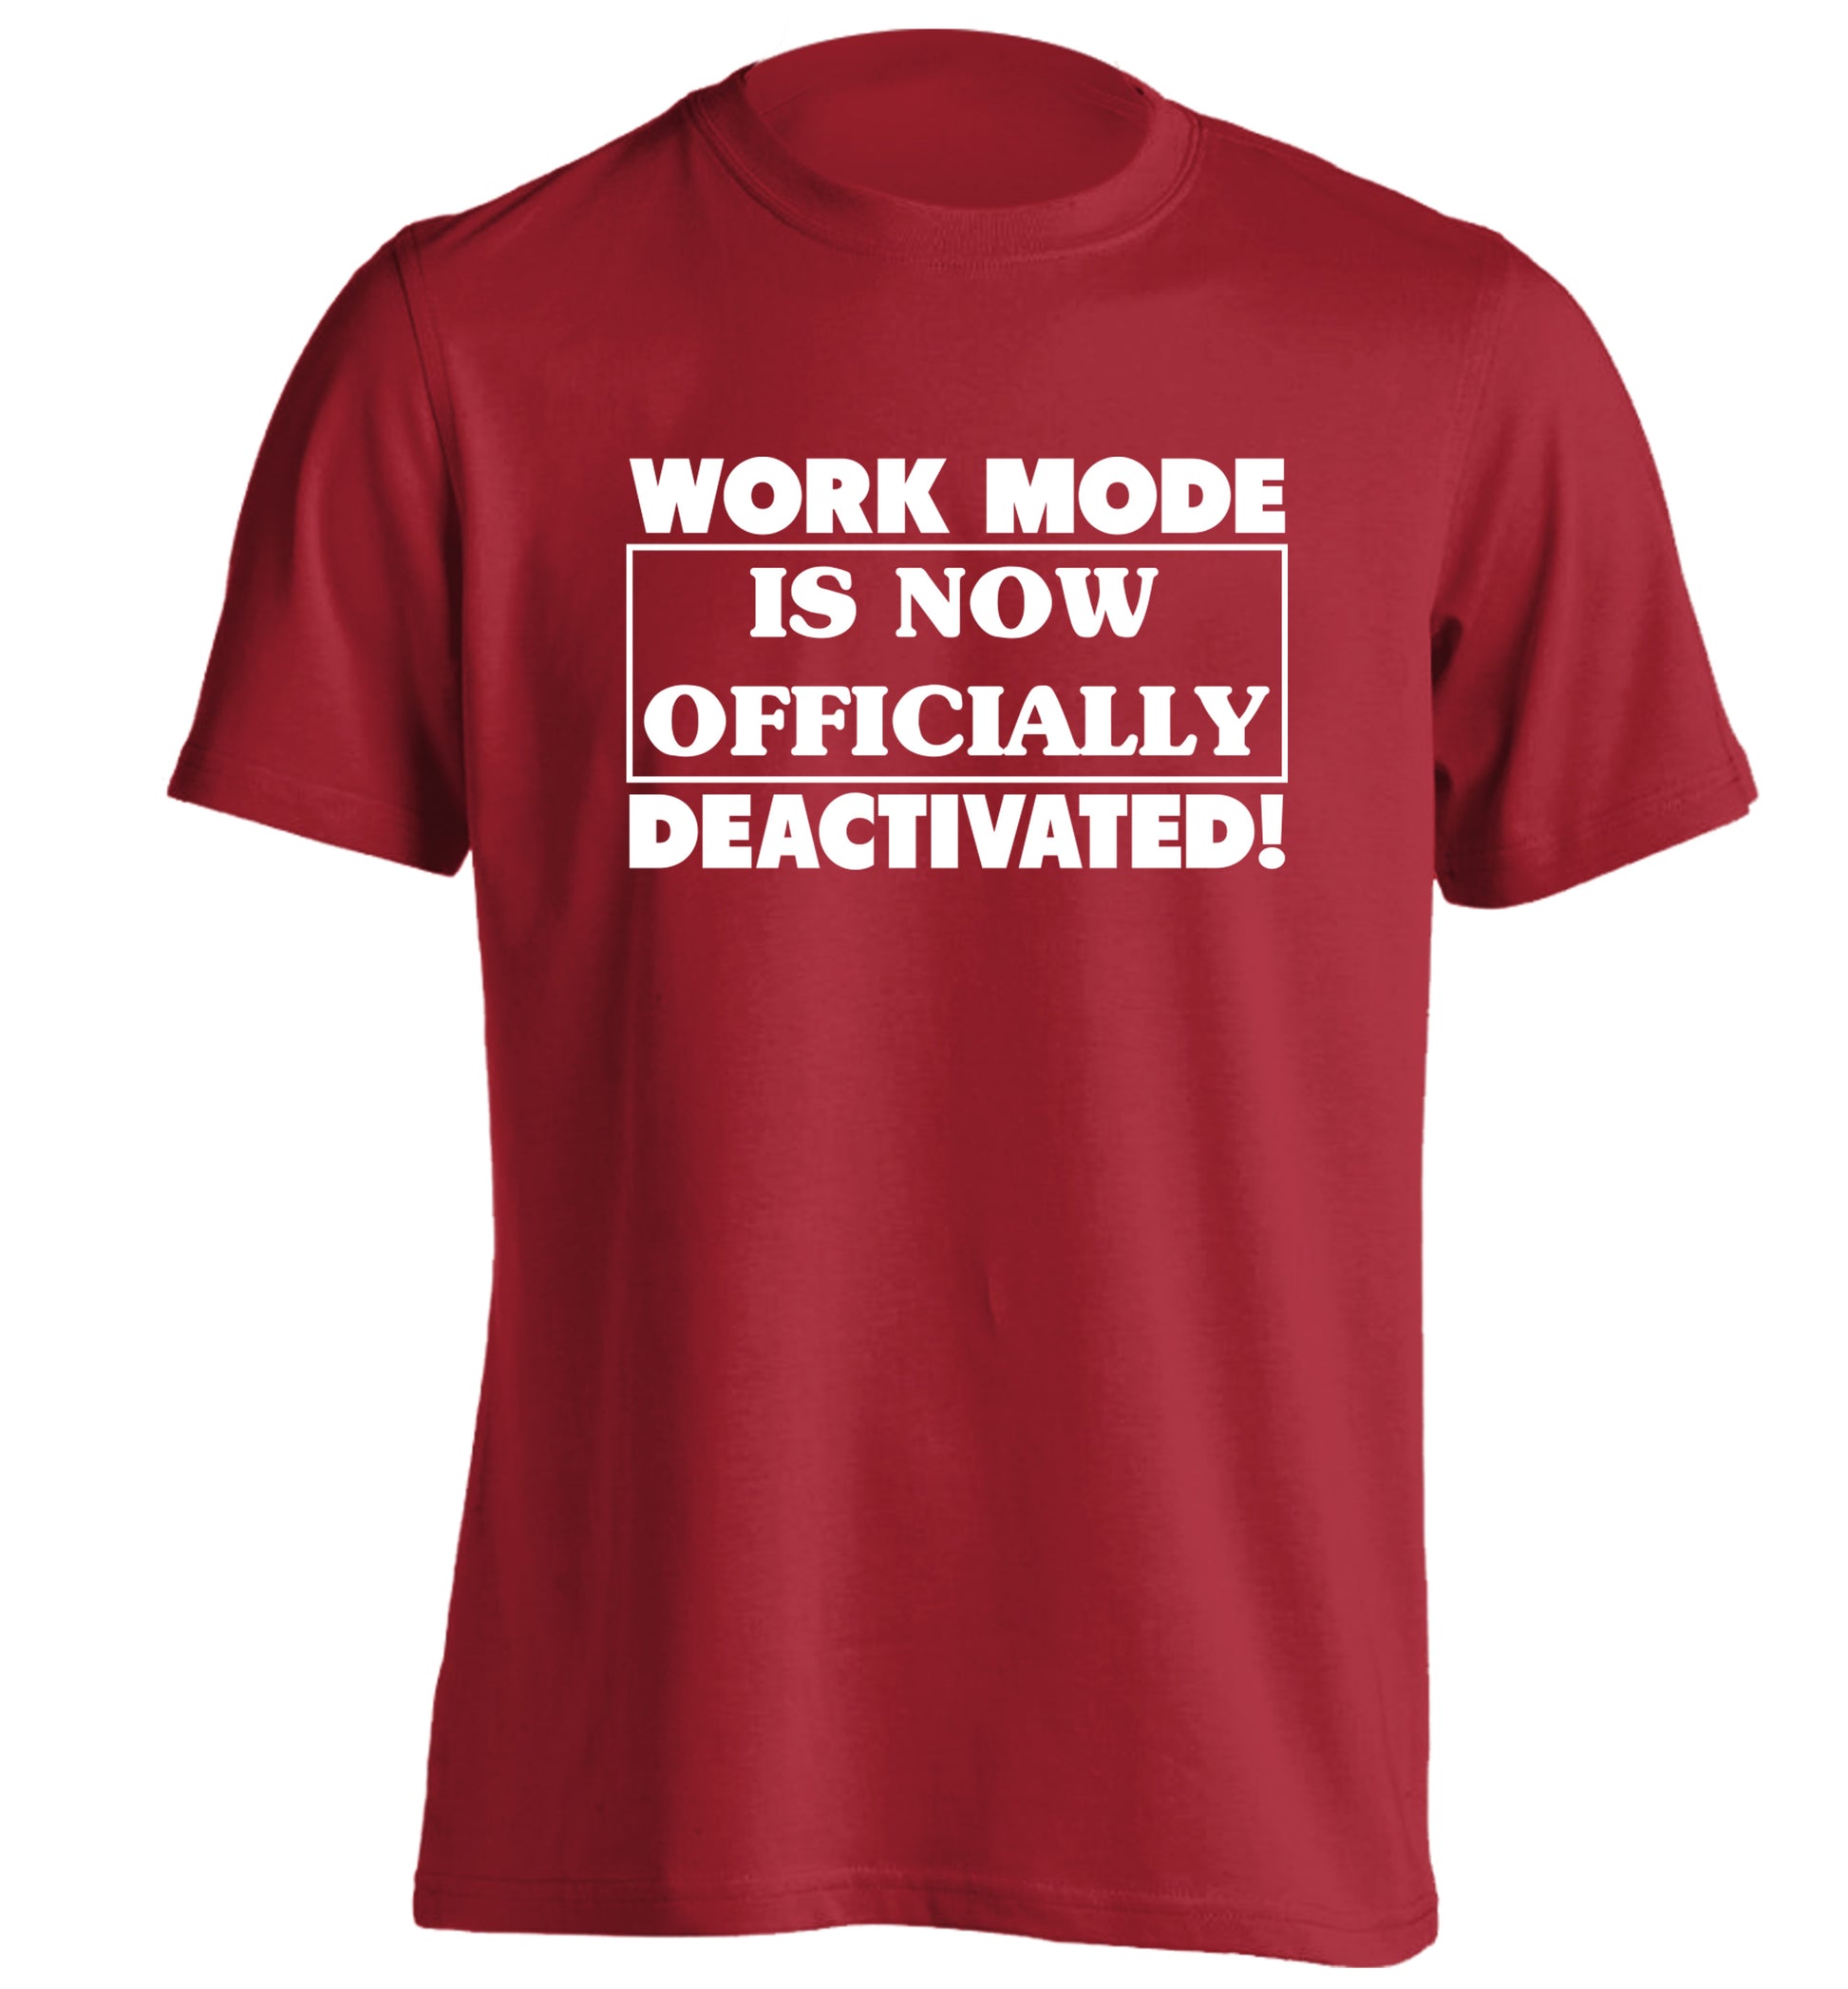 Work mode is now officially deactivated adults unisex red Tshirt 2XL